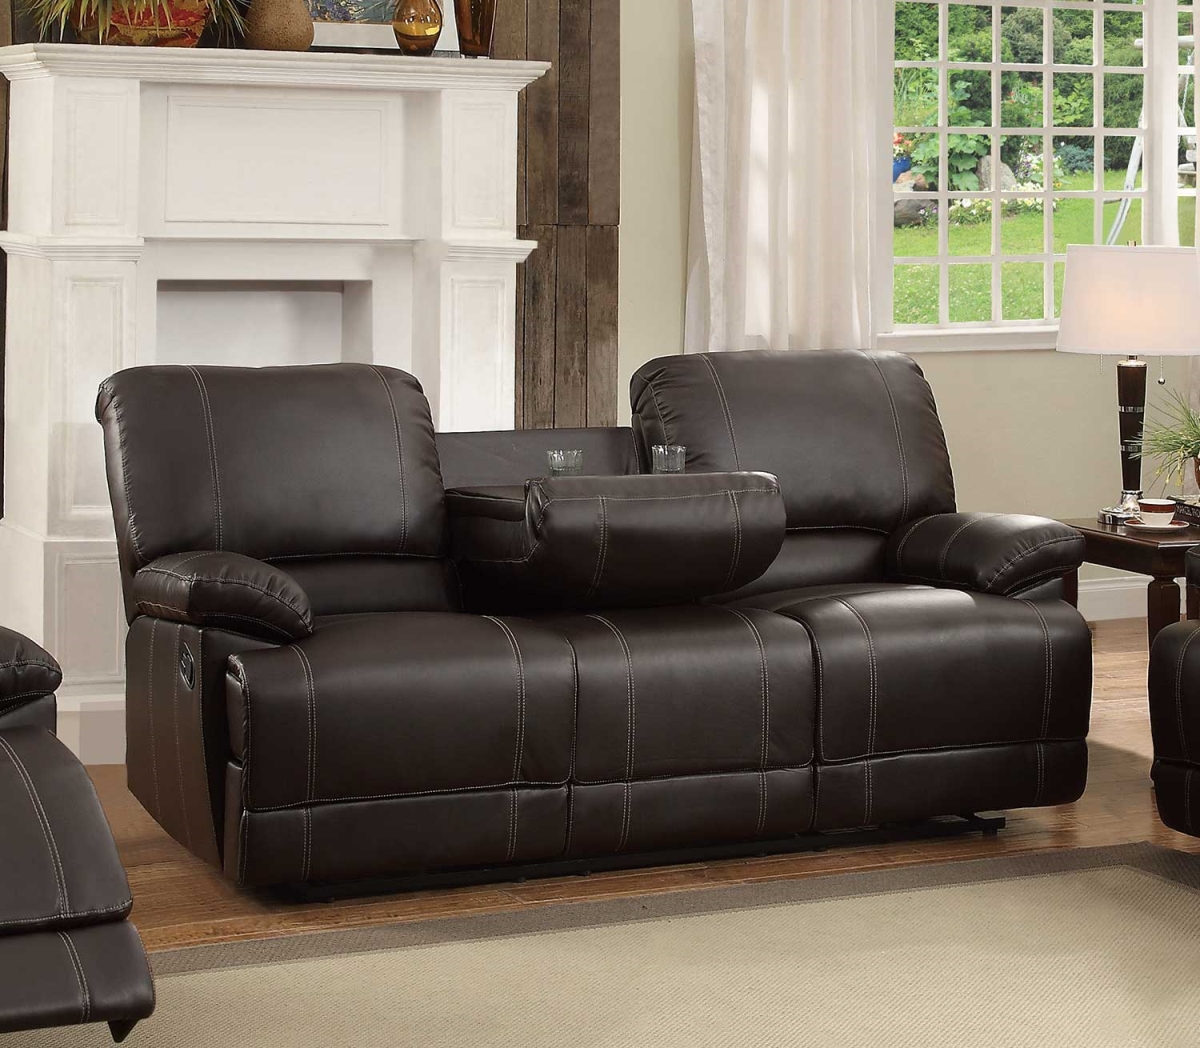 8403-3 39 X 38 X 81 In. Cassville Double Reclining Sofa With Center Drop-down Cup Holder - Dark Brown